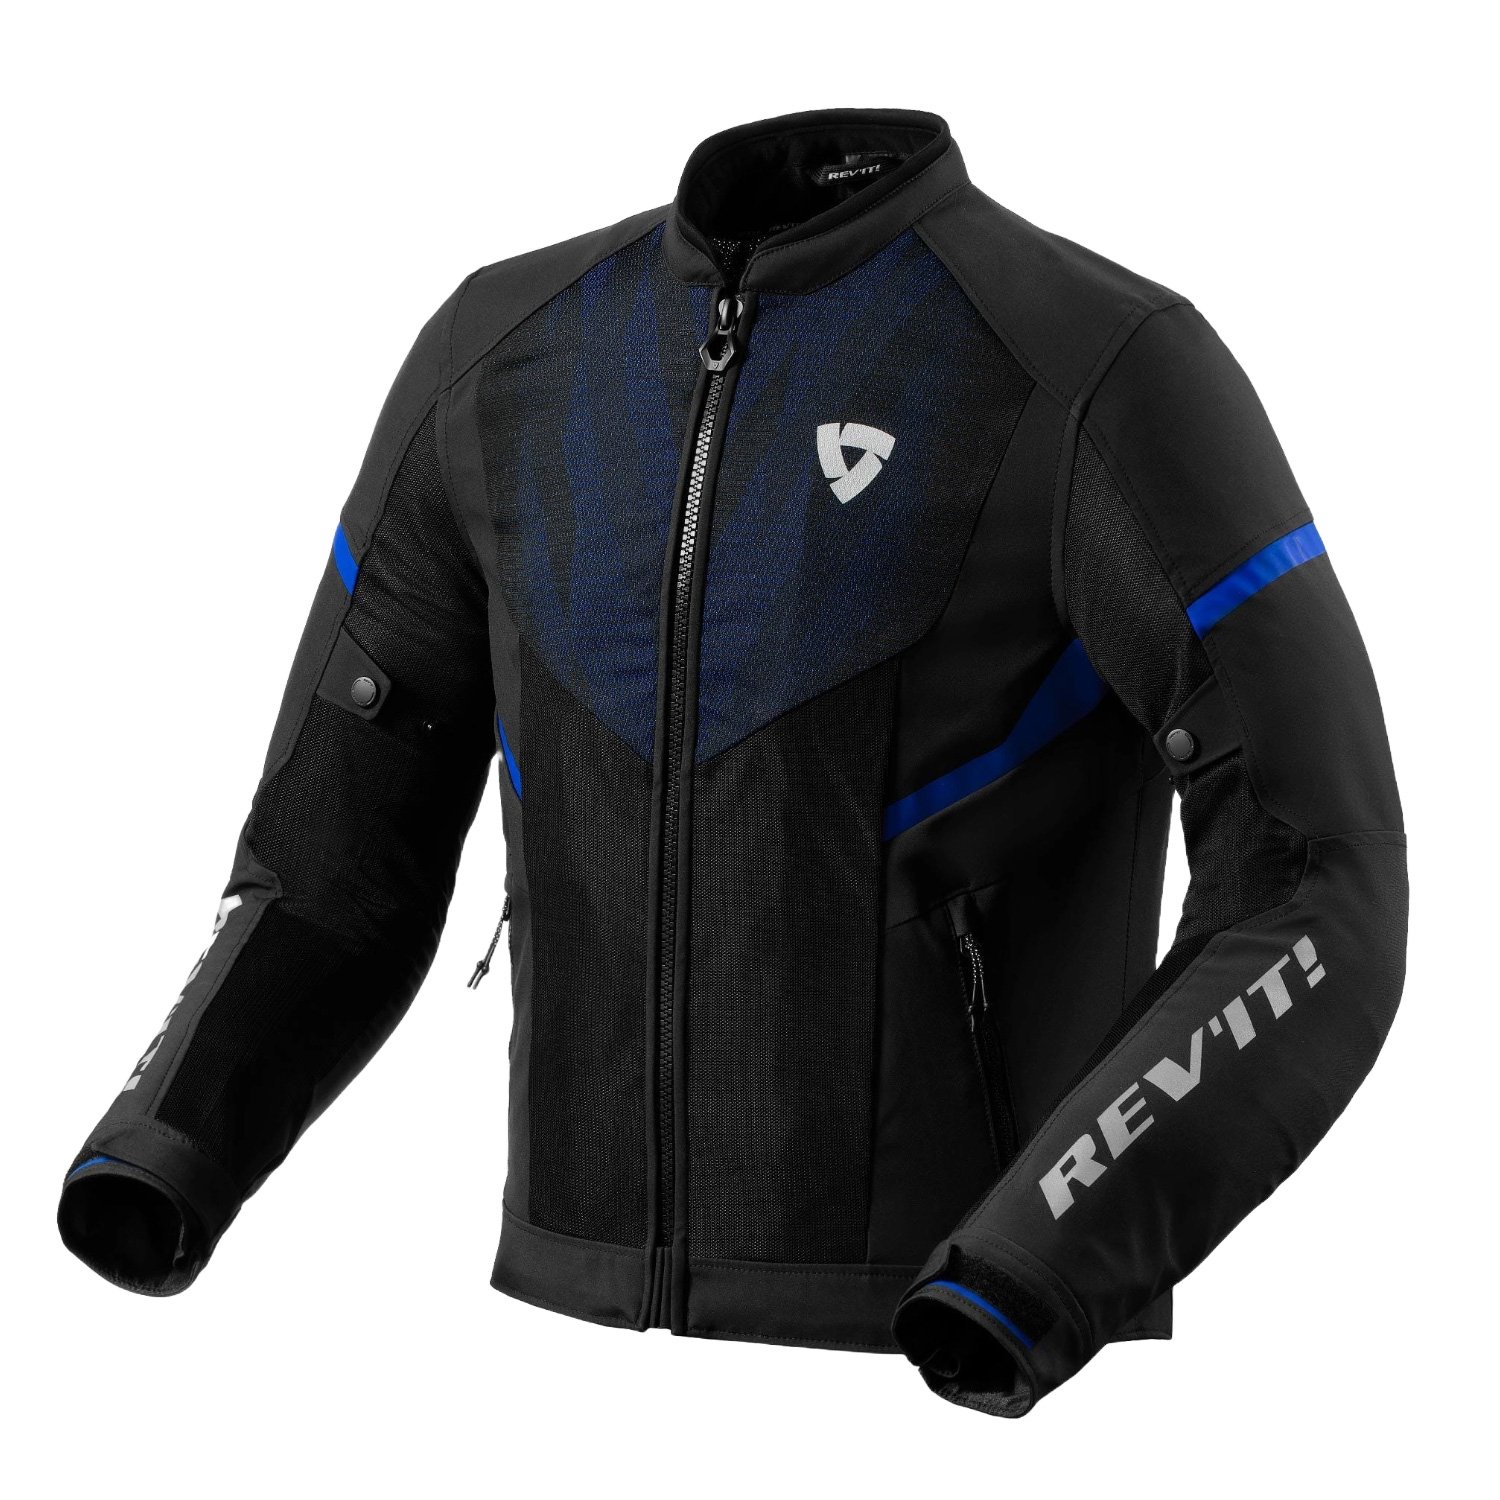 Image of REV'IT! Hyperspeed 2 GT Air Jacket Black Blue Size S ID 8700001367523